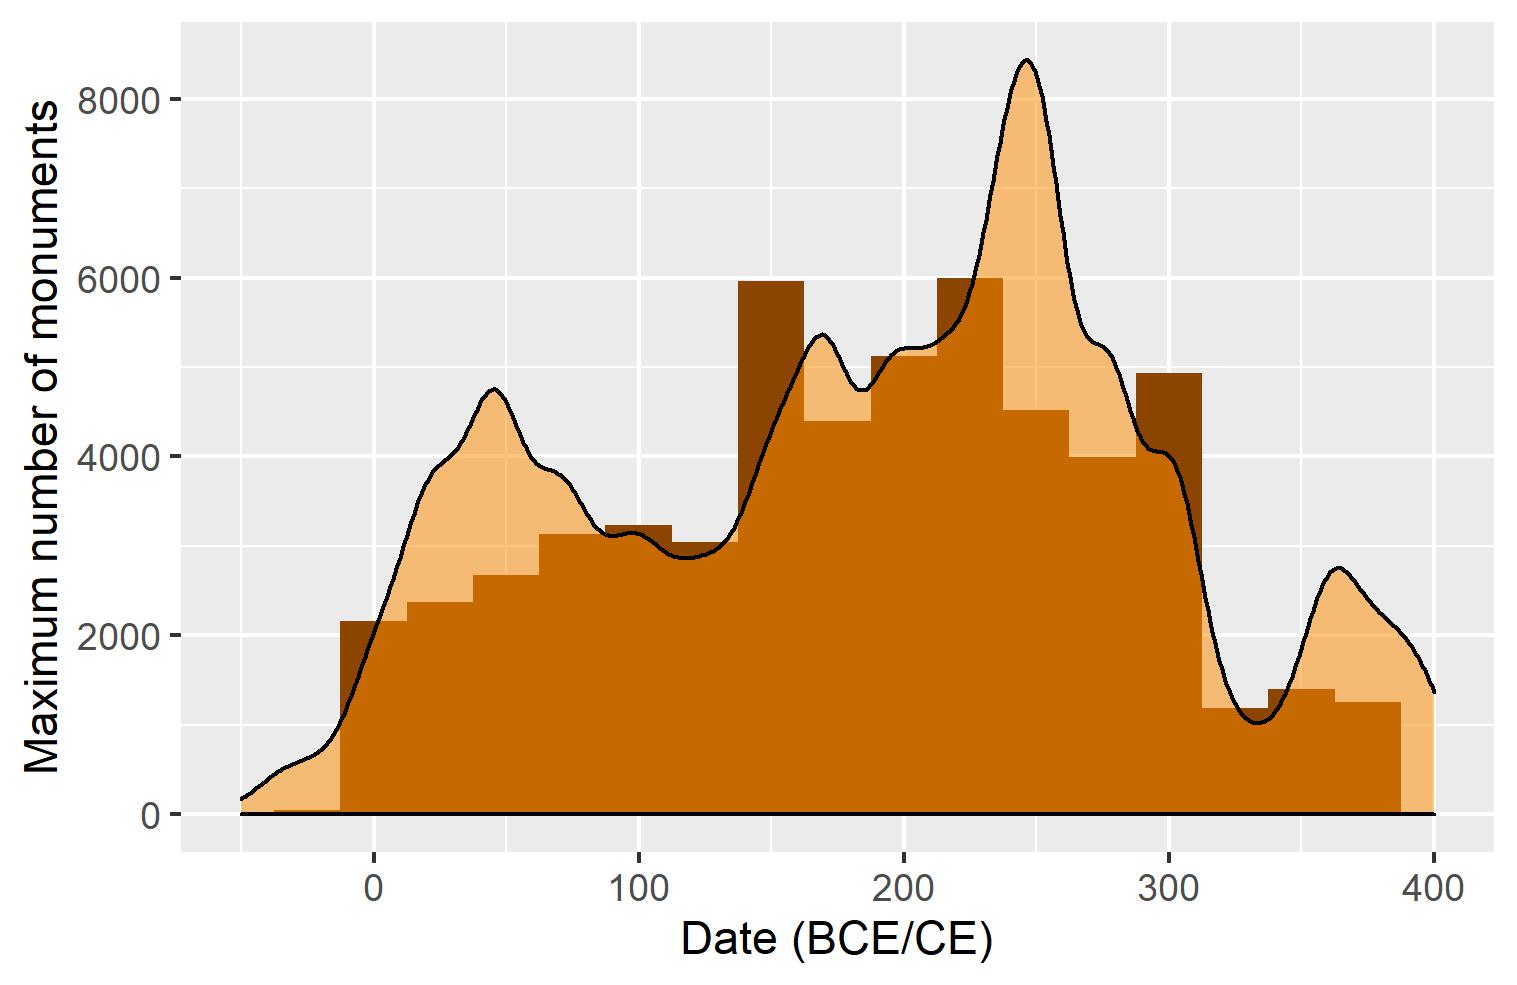 scaled density graph of the distribution of epigraphic monuments in dalmatia, with histograms. y axis is maximun number of monuments, x axis is the date in BCE/CE. there is first rise is 1st century, a peak in late 2nd, and a drop in early 4th CE.